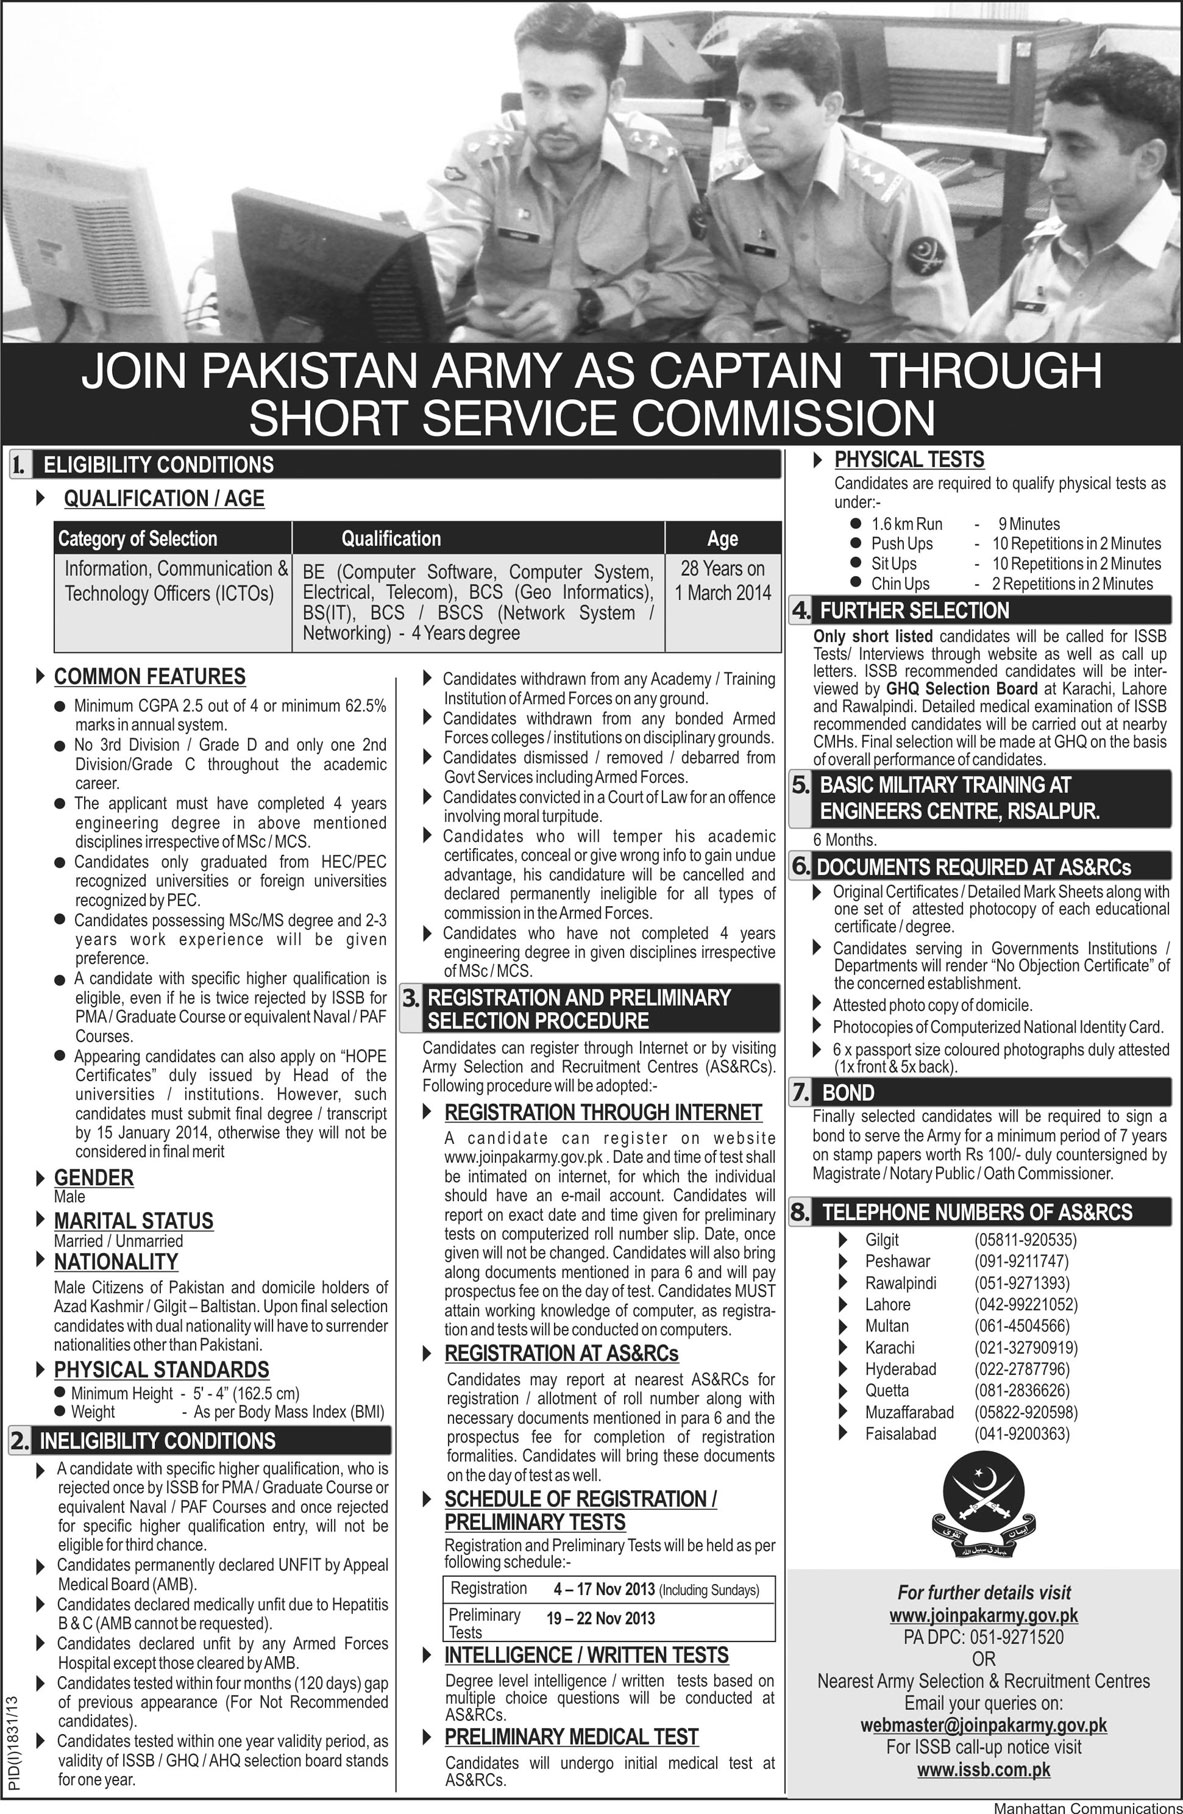 ICTO Pakistan Army 2013 November Join as Captain through Short Service Commission